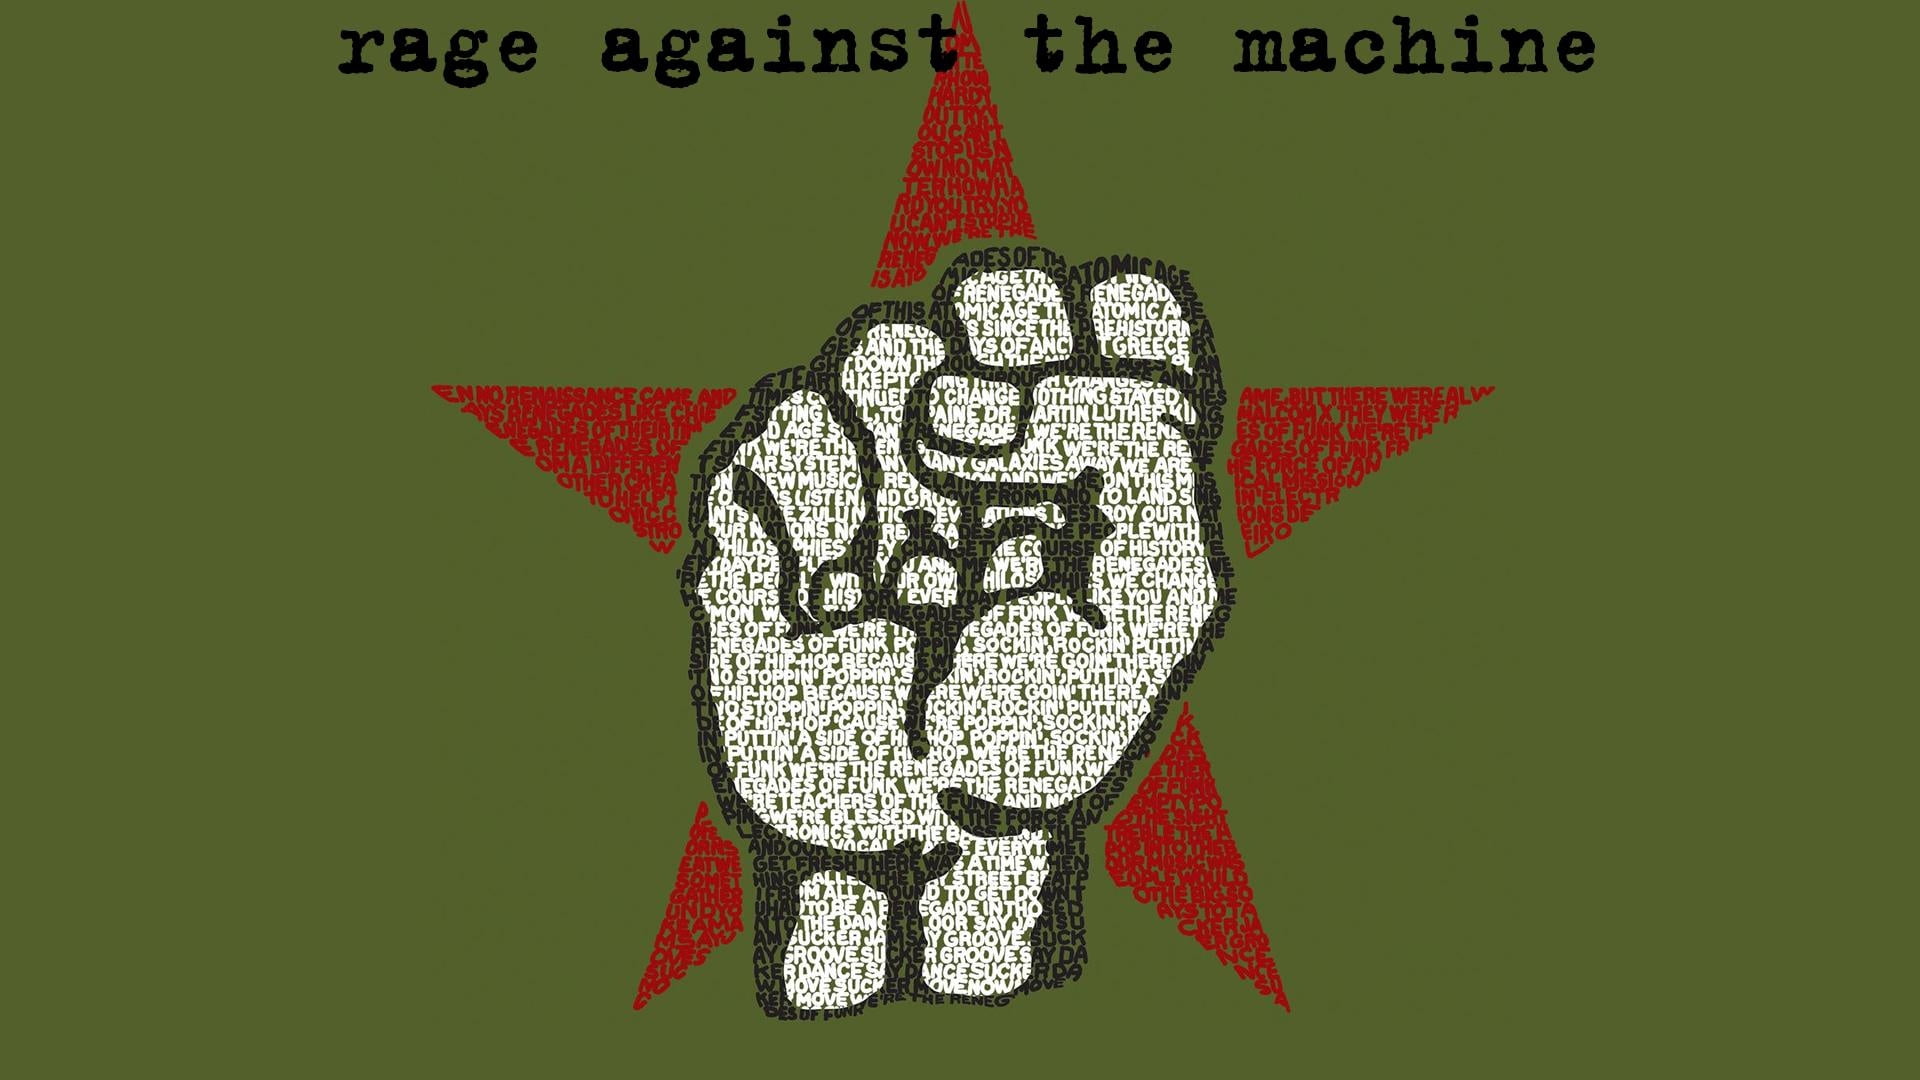 rage against the machine text, fist, star, name, background, illustration